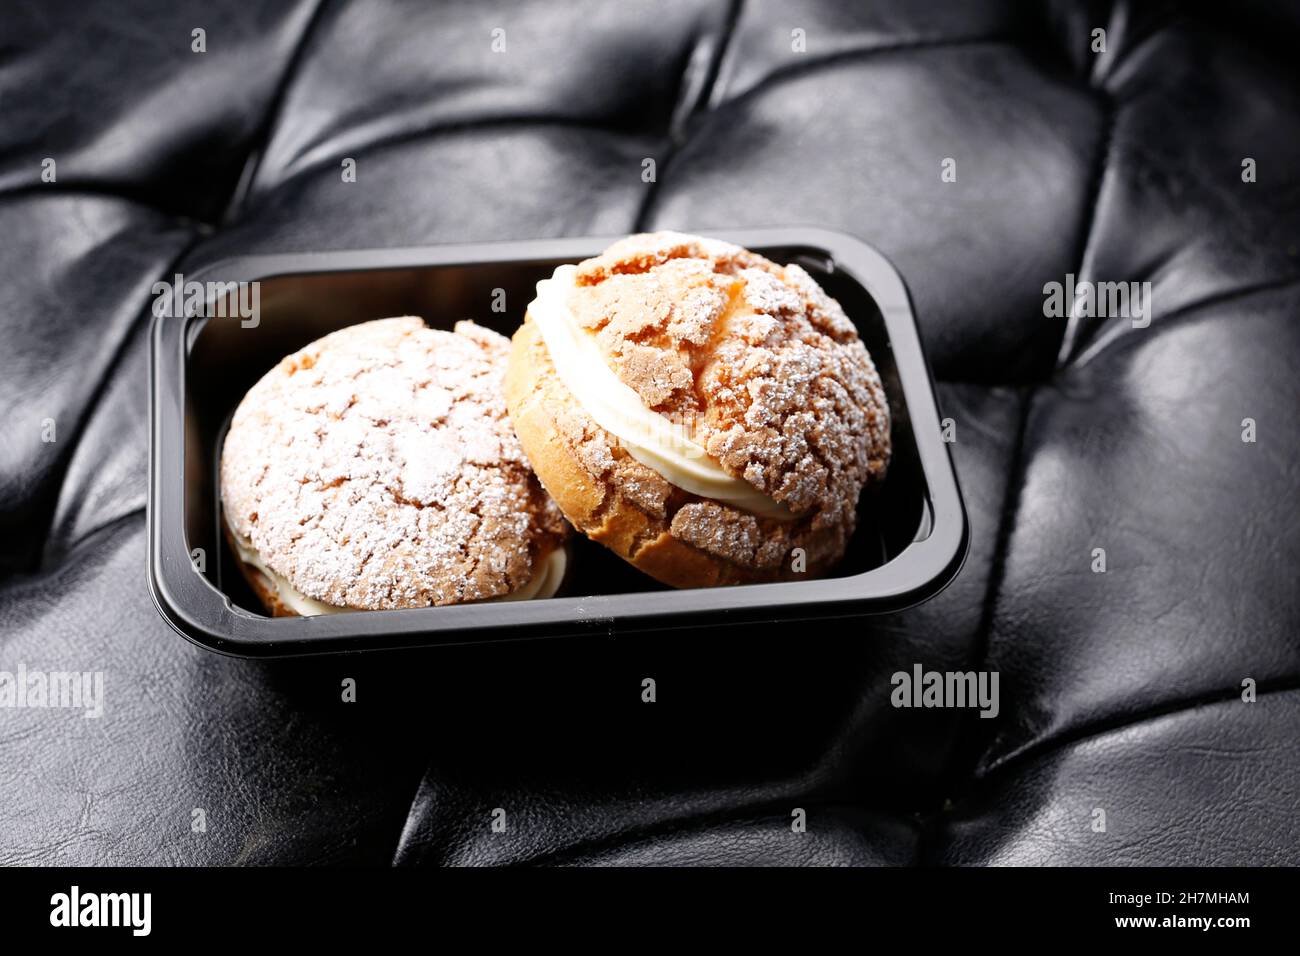 Cream cake, dessert in a takeaway box. A tasty dish.Culinary photography. Suggestion to serve the dish. Stock Photo